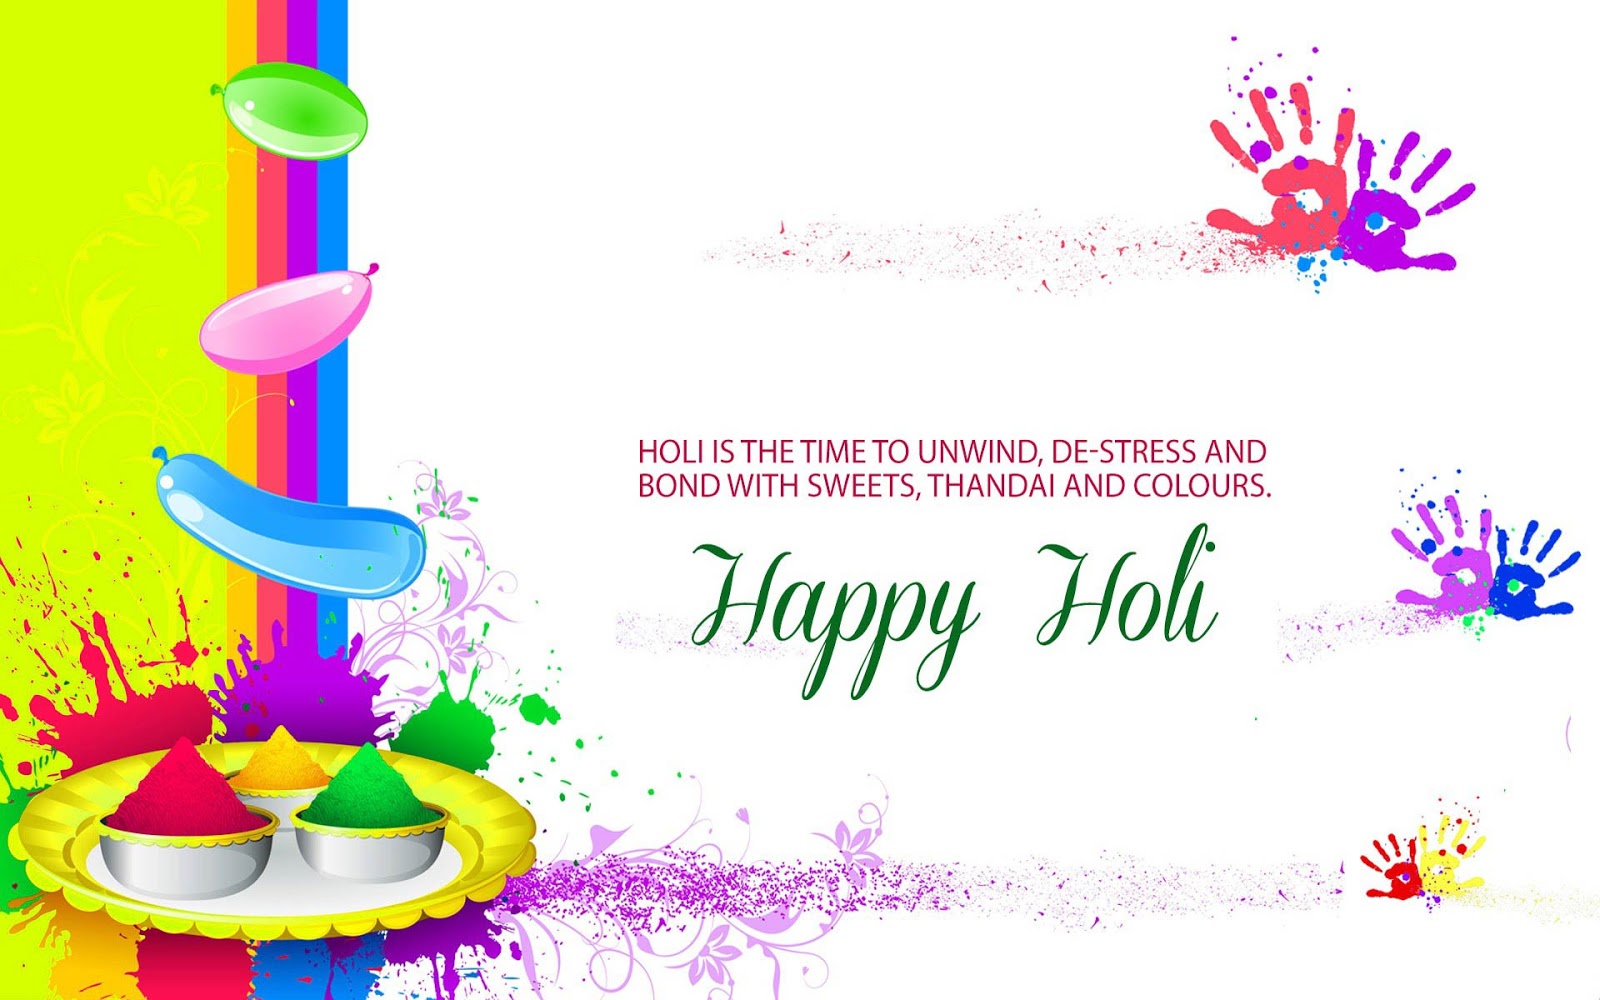 Happy Holi Wishes To Team - HD Wallpaper 